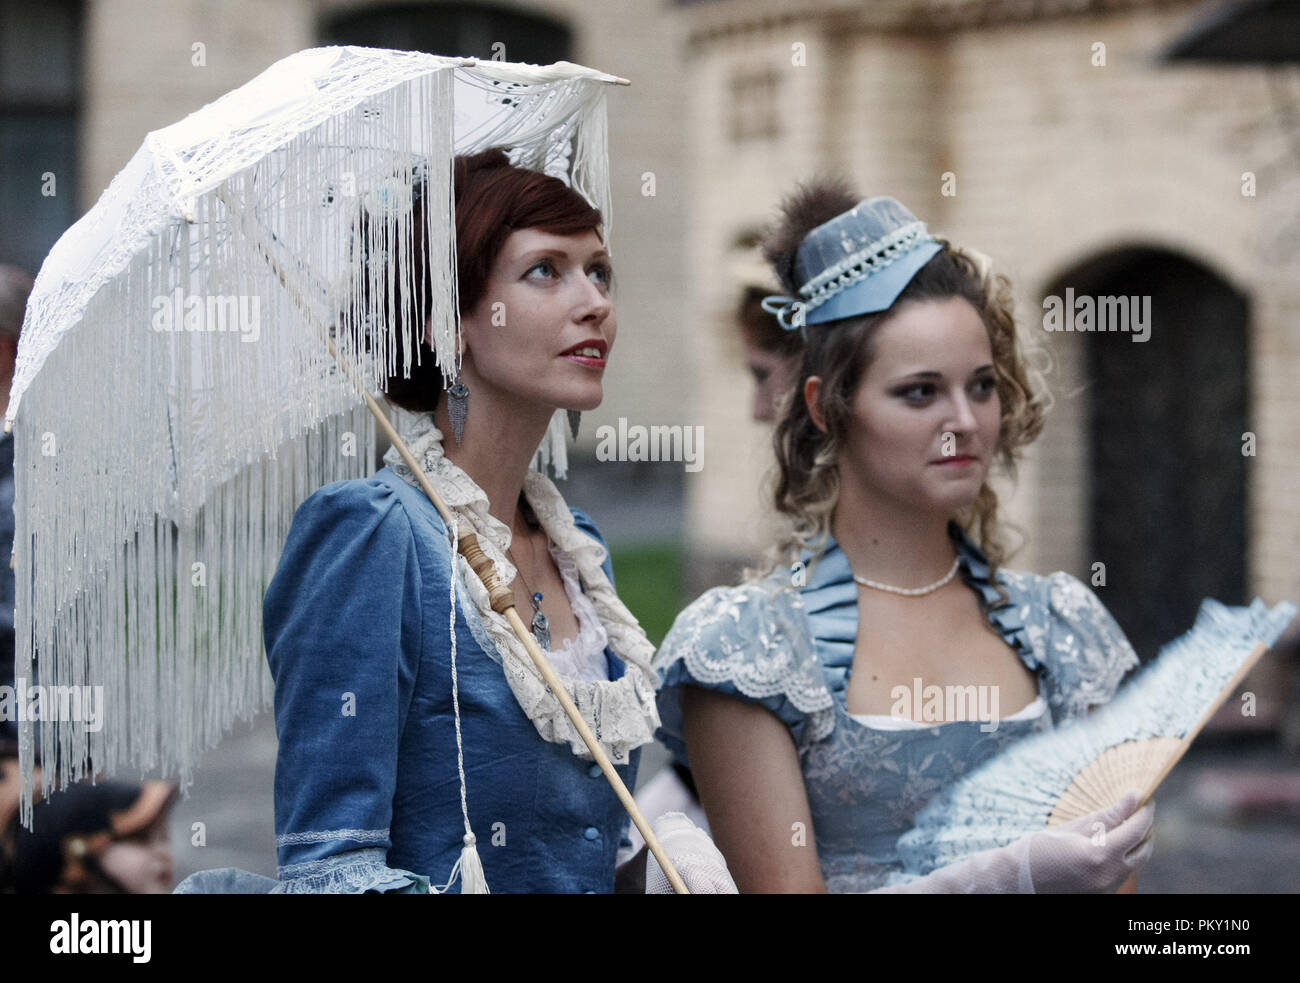 Kiev, Ukraine. 15th Sep, 2018. Women wearing steampunk costumes are seen during ''VI KyivSteamCon'' event in Kiev.The Steampunk festival involving workshops, talks, competitions, dances and lectures attracts fans of subgenre steampunk, cosplay and science fiction. Credit: Pavlo Gonchar/SOPA Images/ZUMA Wire/Alamy Live News Stock Photo